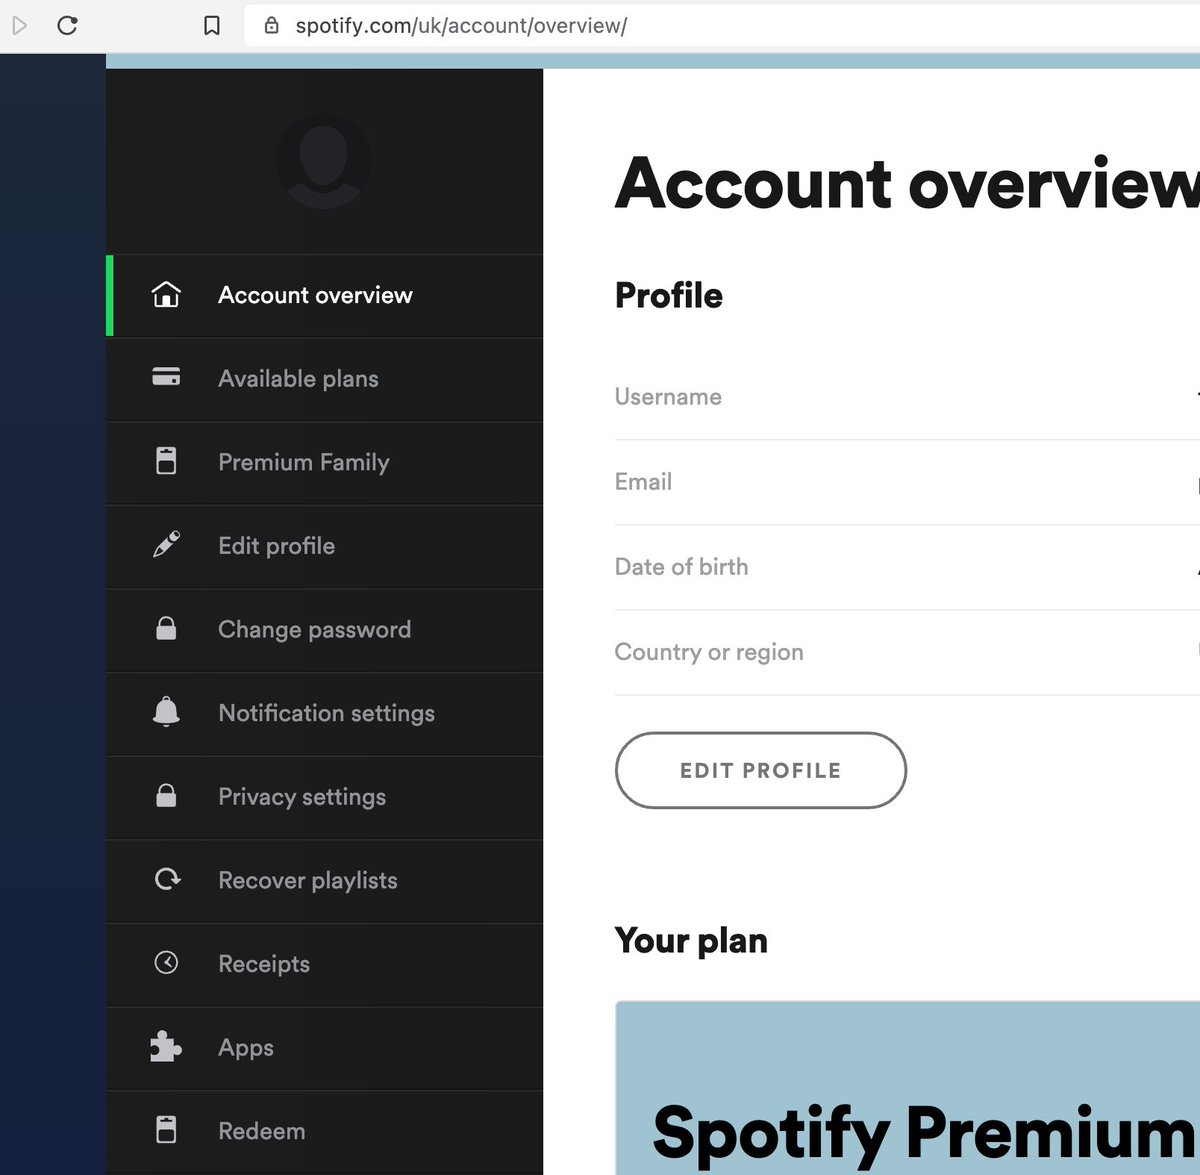 If you do use the Spotify desktop app, & want to control privacy as best you can in 2021, also go to your account via a browser. Check out the 'privacy settings' & 'notification settings'